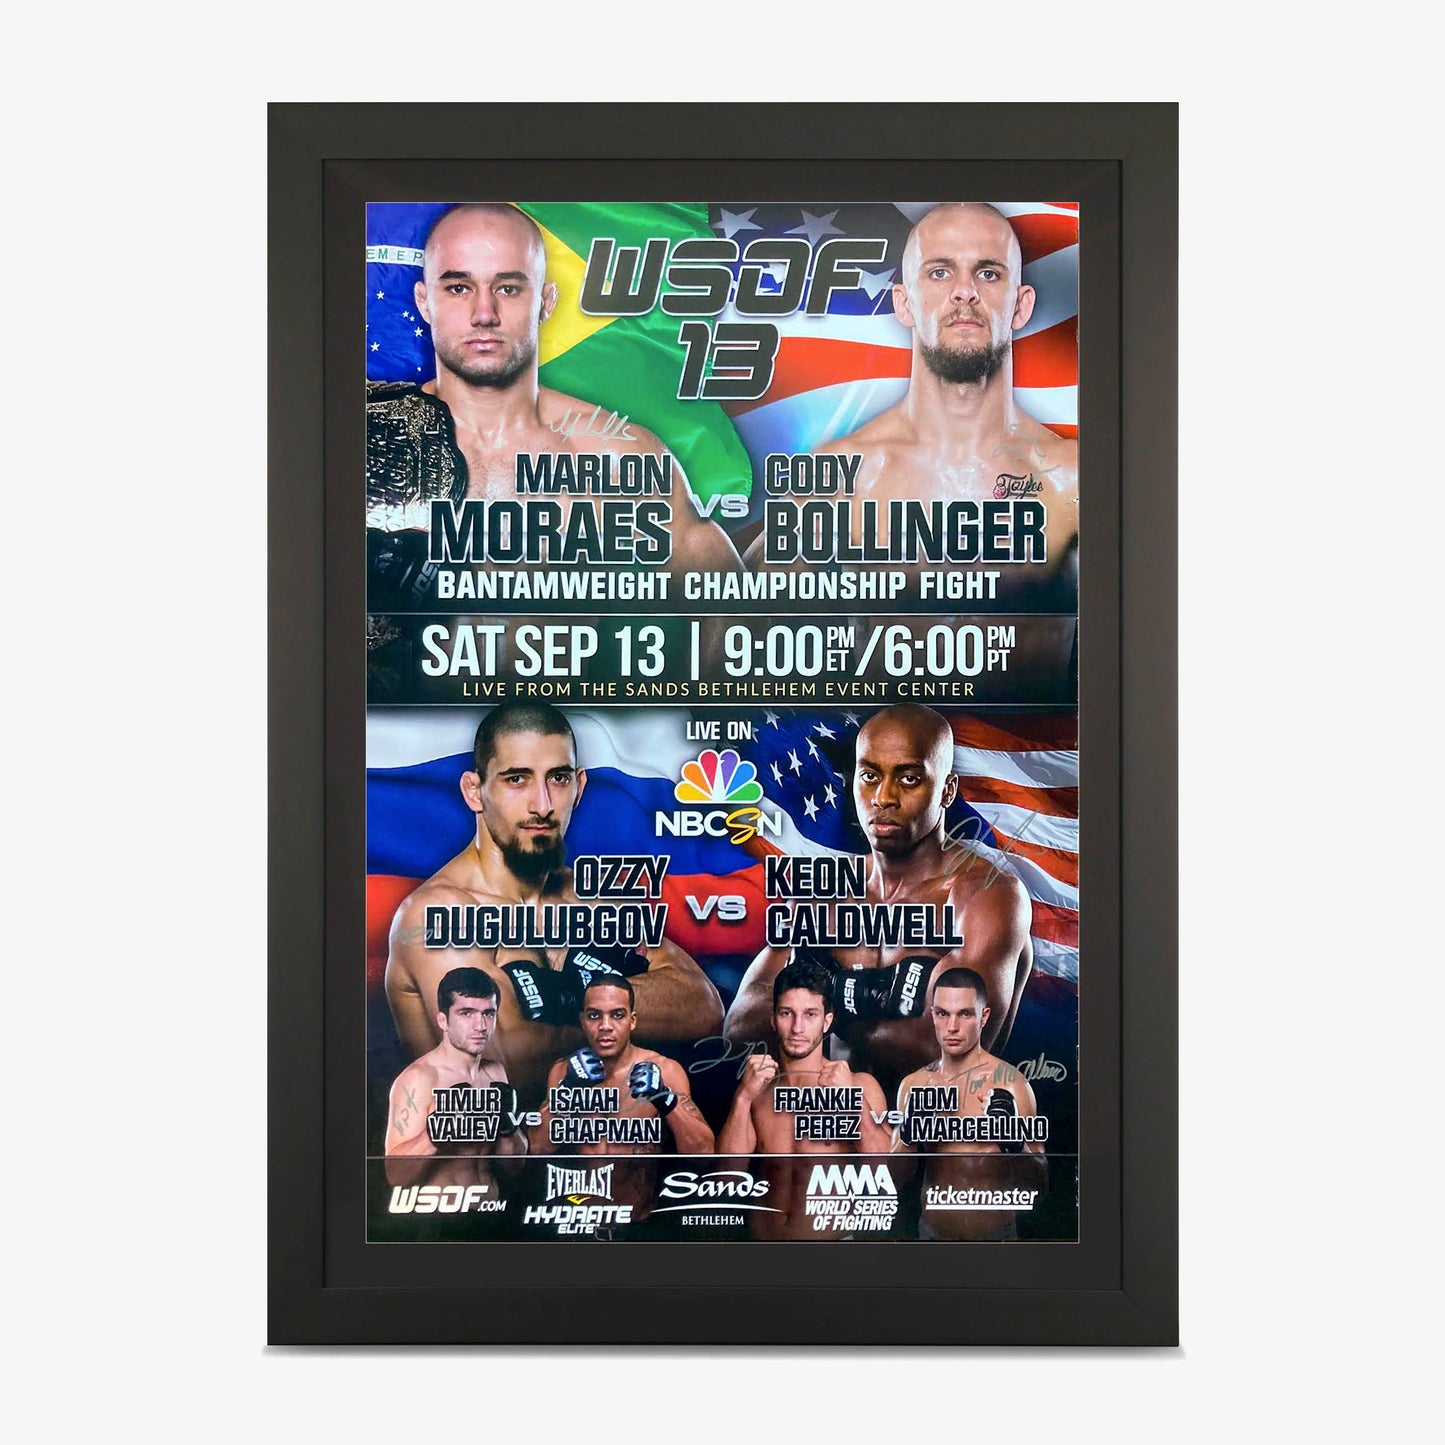 WSOF 13 Autographed Event Poster available at www.slamazon.ca